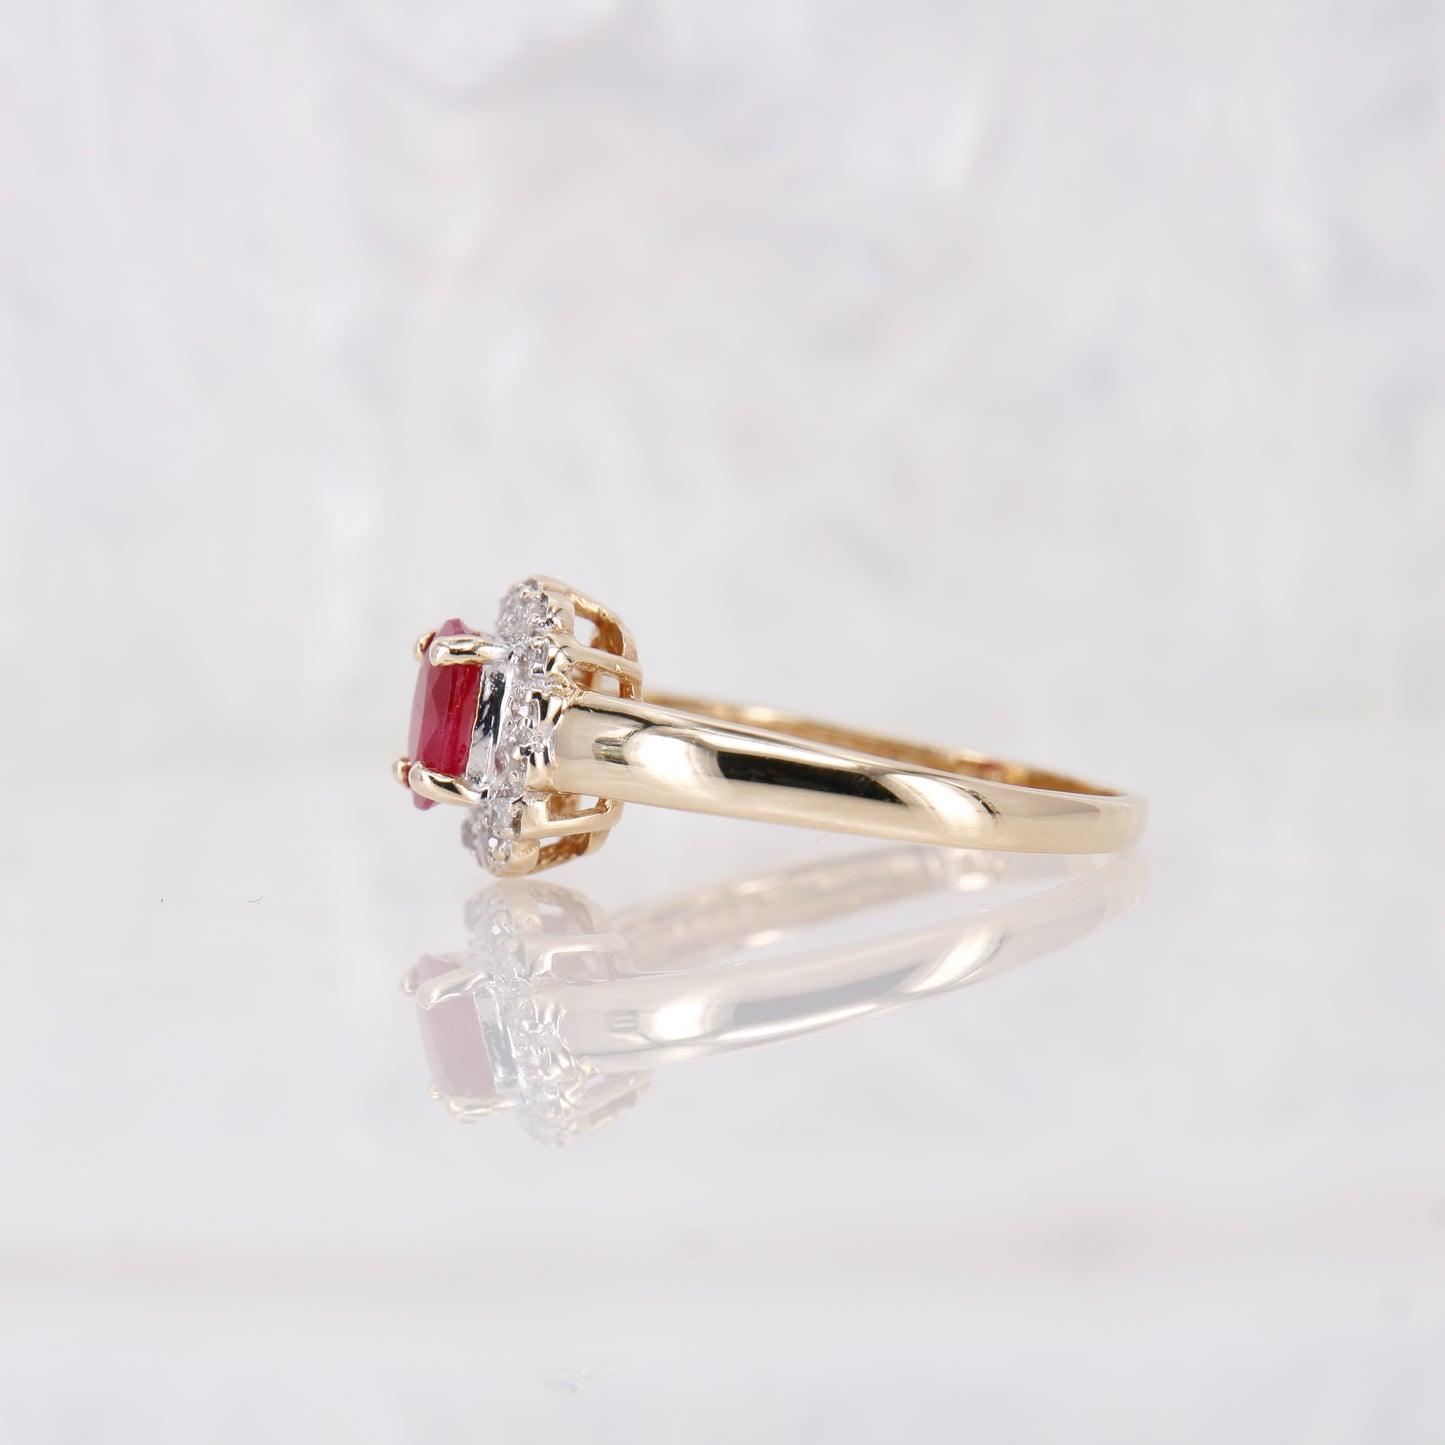 Secondhand Vintage Garnet and Ring. Halo cut Garnet with a halo of diamonds, set in 9ct gold.